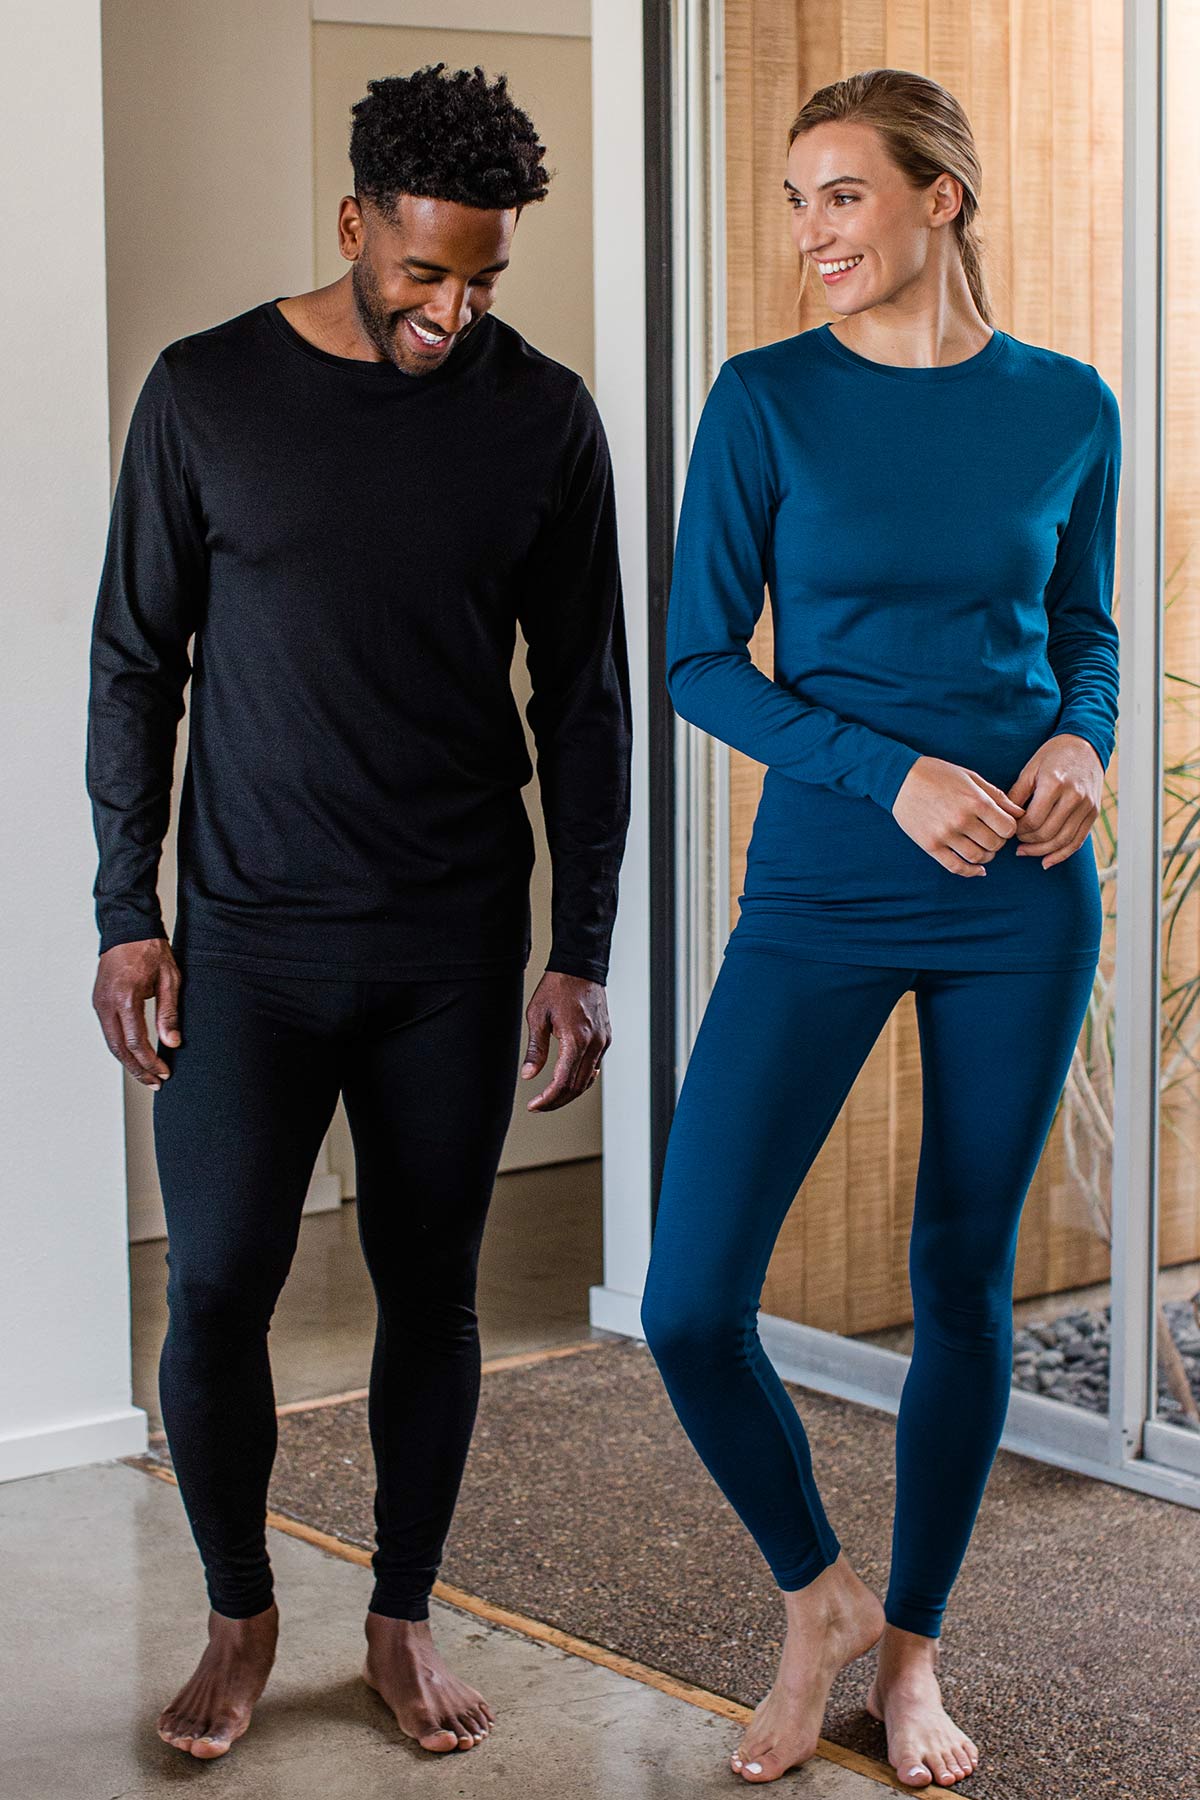 A man and womand stand together smiling, both wearing Yala Superfine Merino Wool Long Sleeve Top in Black and Lapis